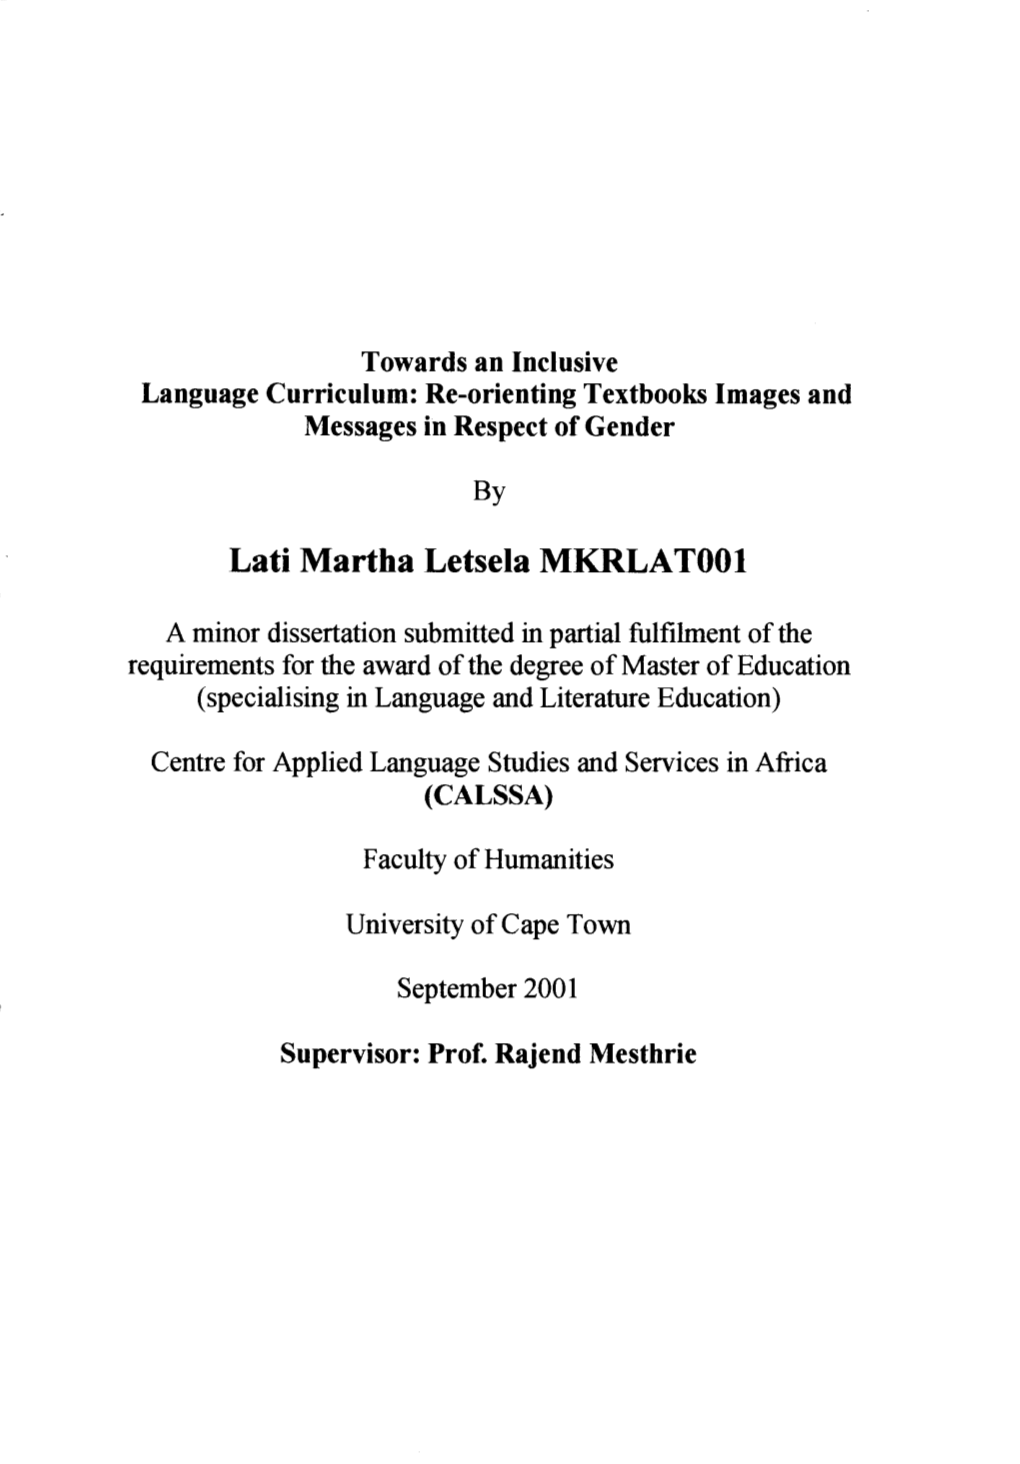 Towards an Inclusive Language Curriculum: Re-Orienting Textbooks Images and J.L Messages in Respect of Gender